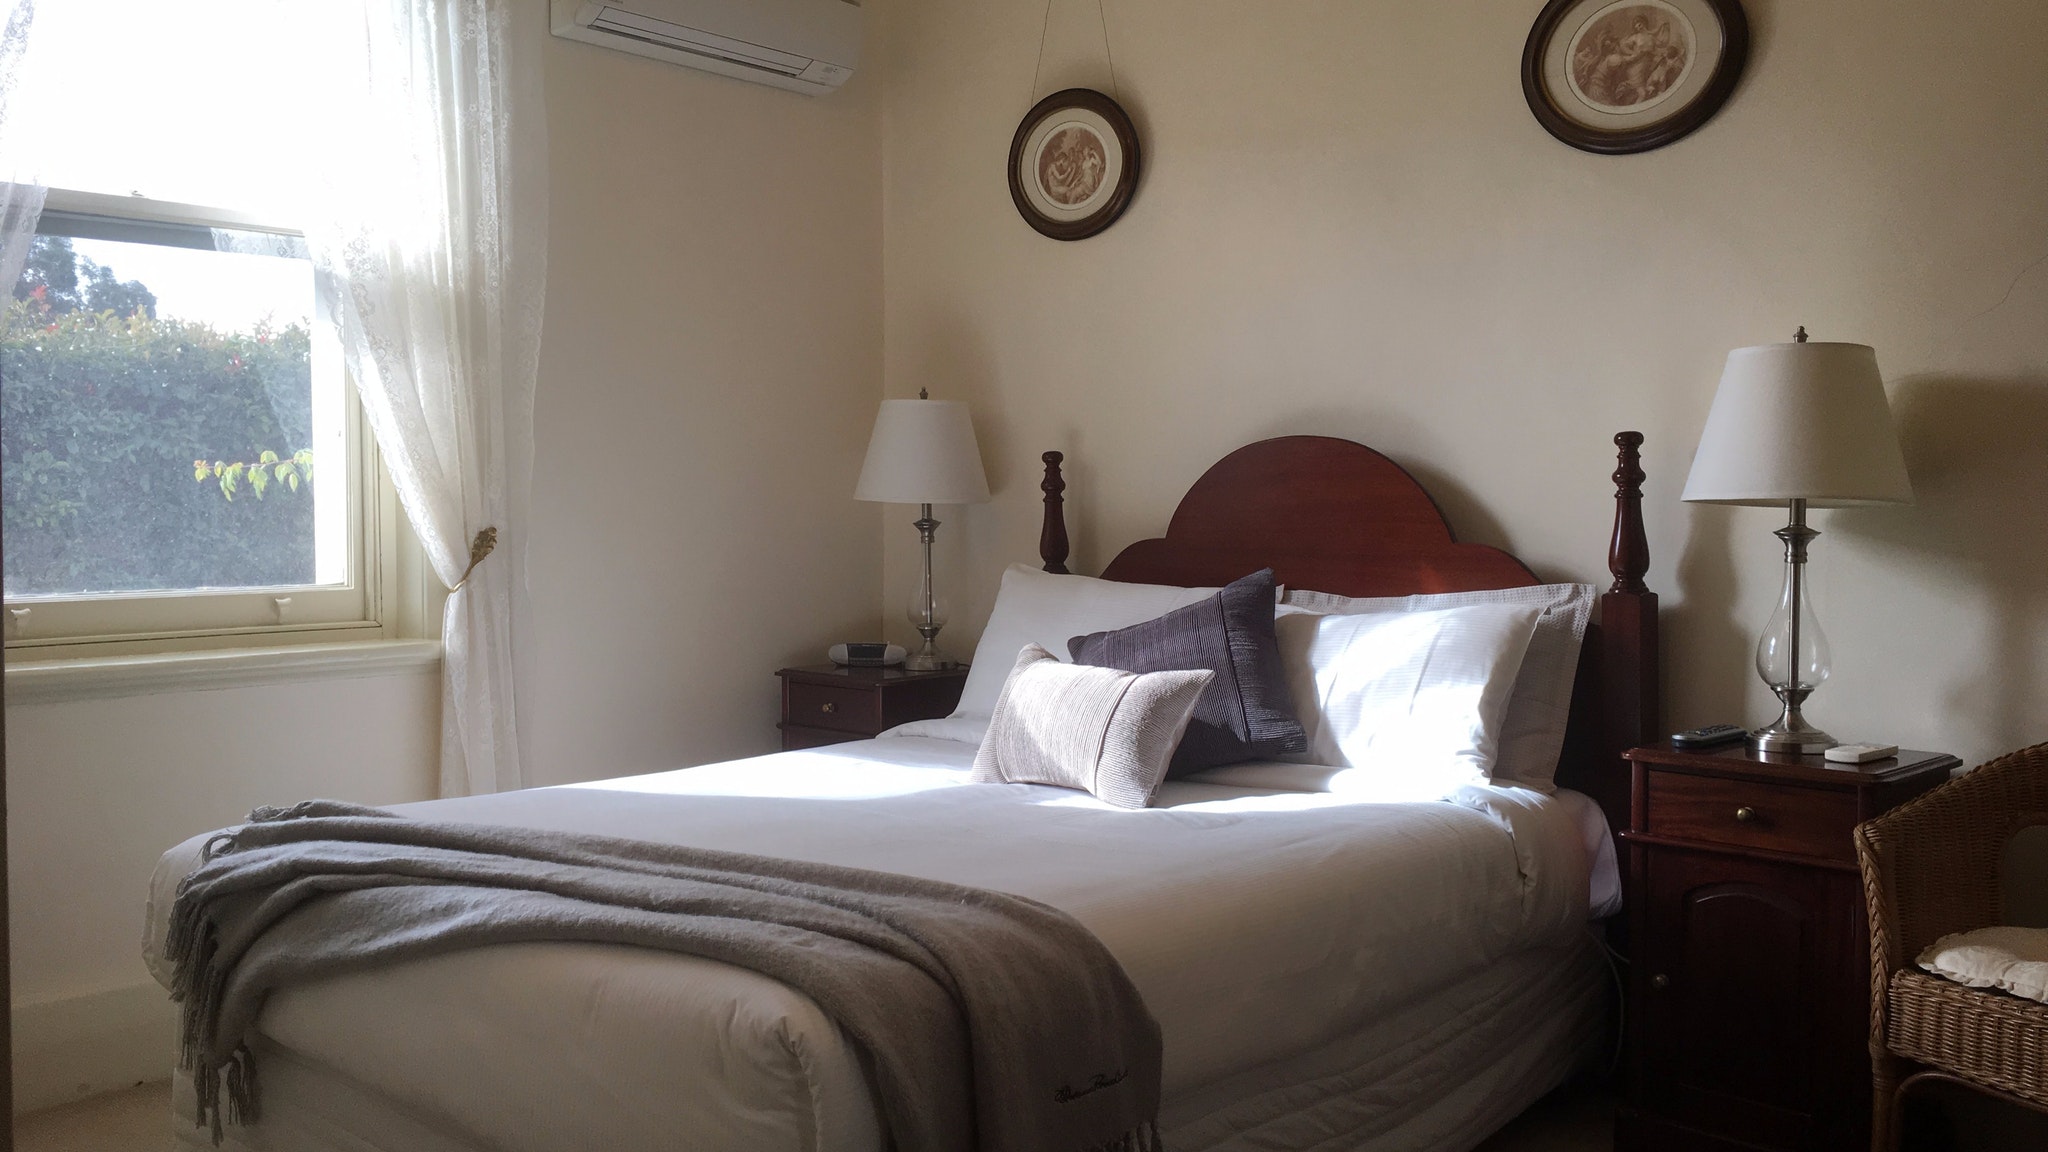 Barossa House Bed And Breakfast - Accommodation in Surfers Paradise 0